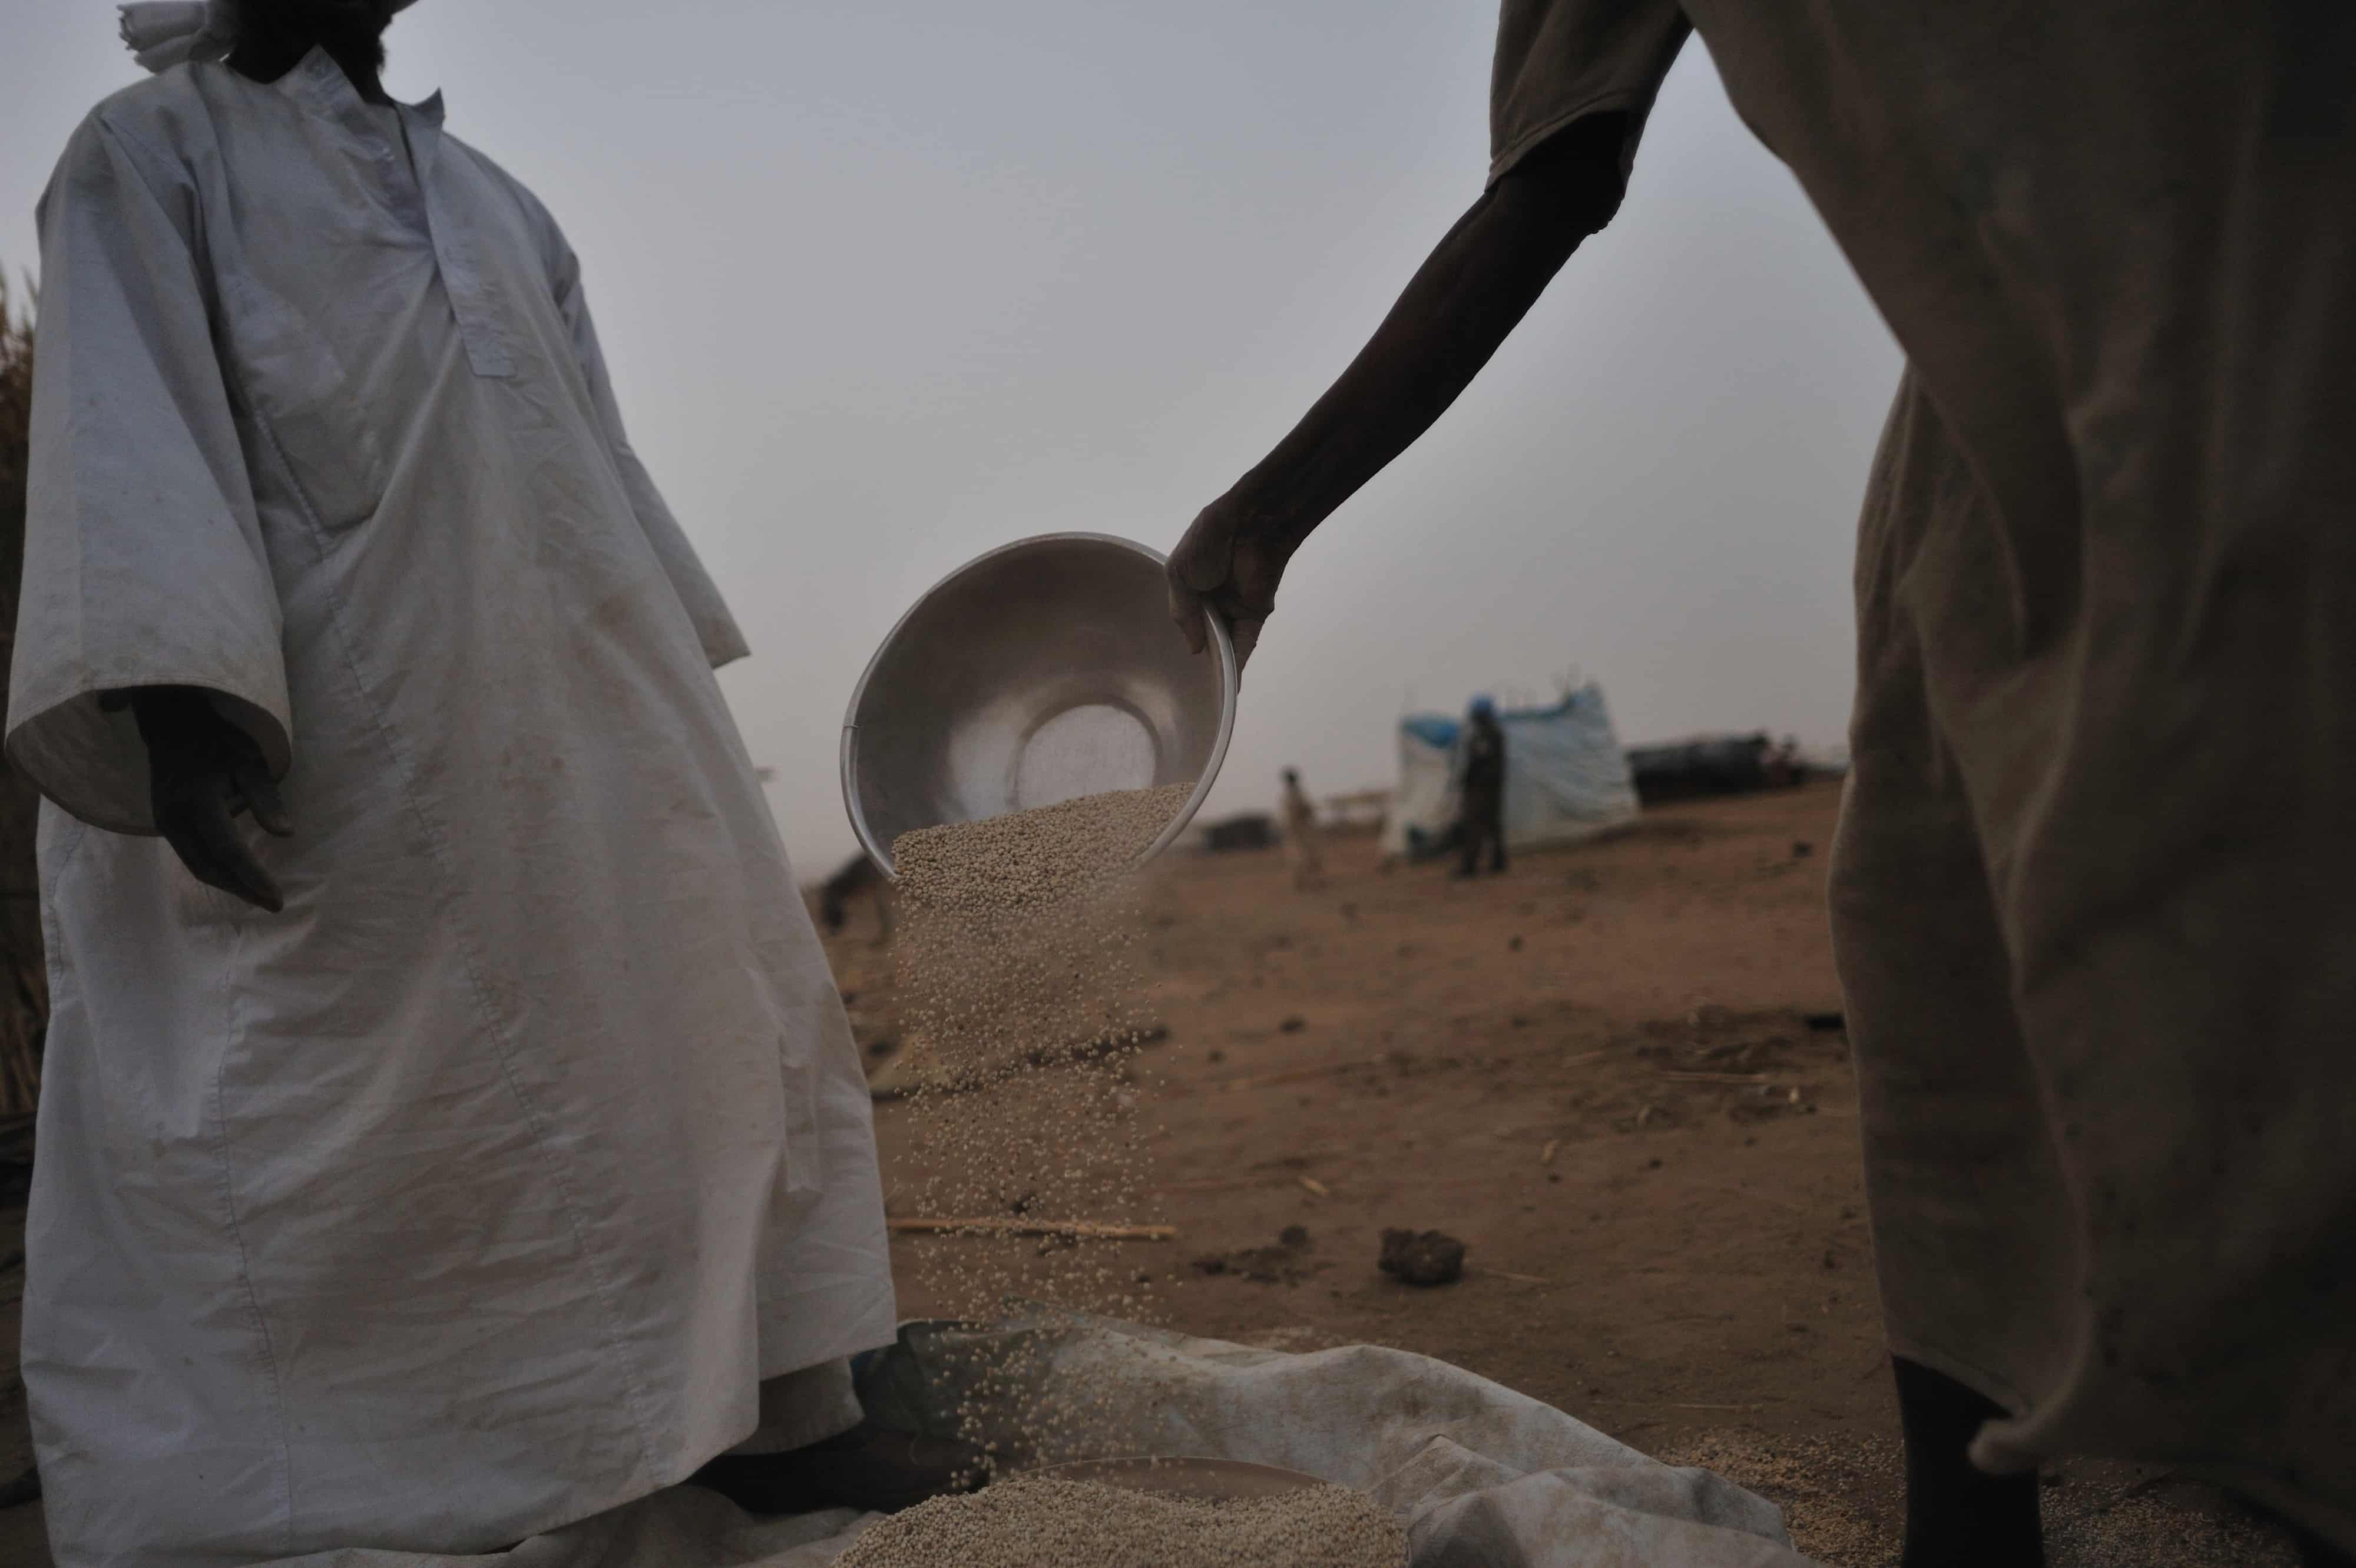 Report: A Child Dies Every Two Hours in Sudan Camp